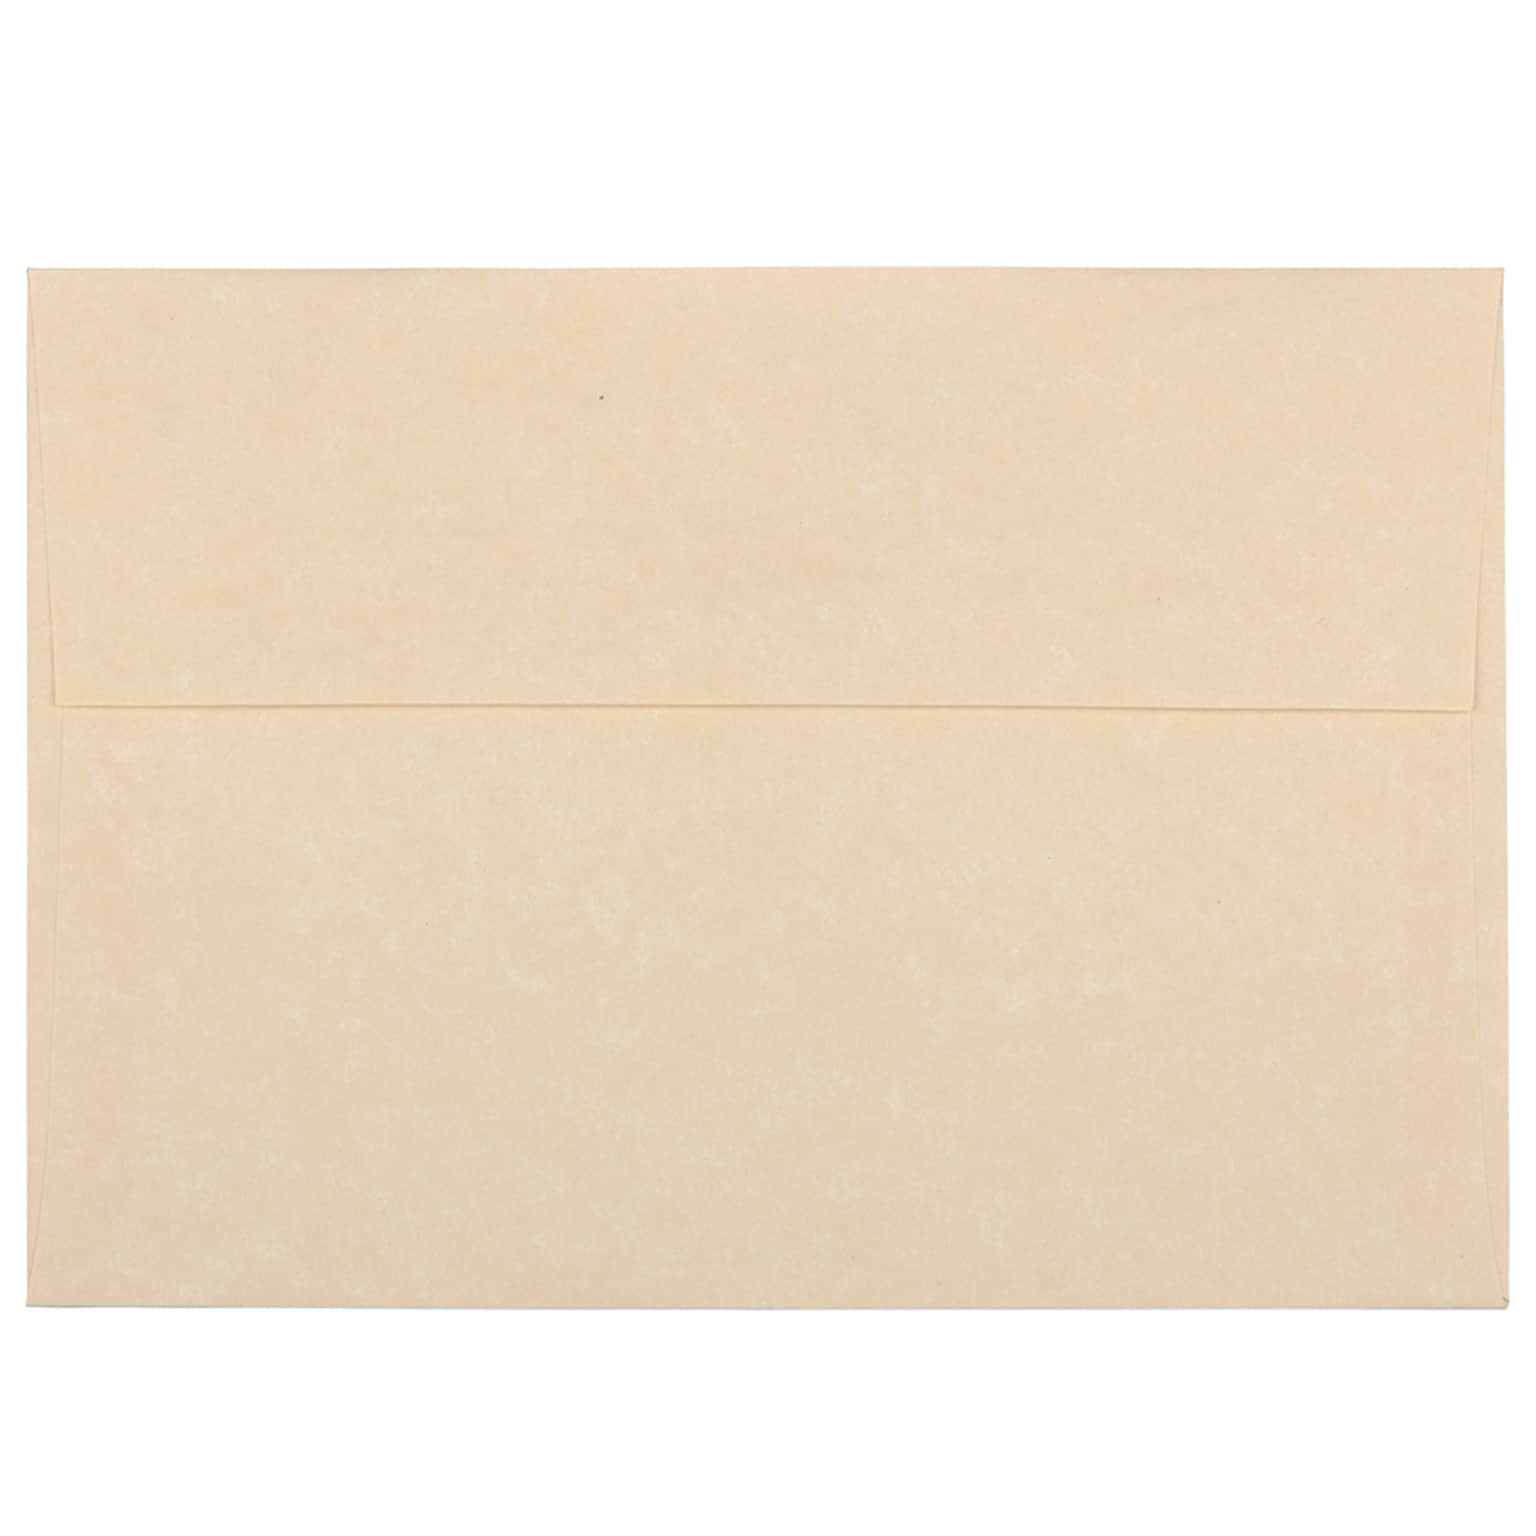 JAM Paper A7 Parchment Invitation Envelopes, 5.25 x 7.25, Brown Recycled, 50/Pack (35311I)